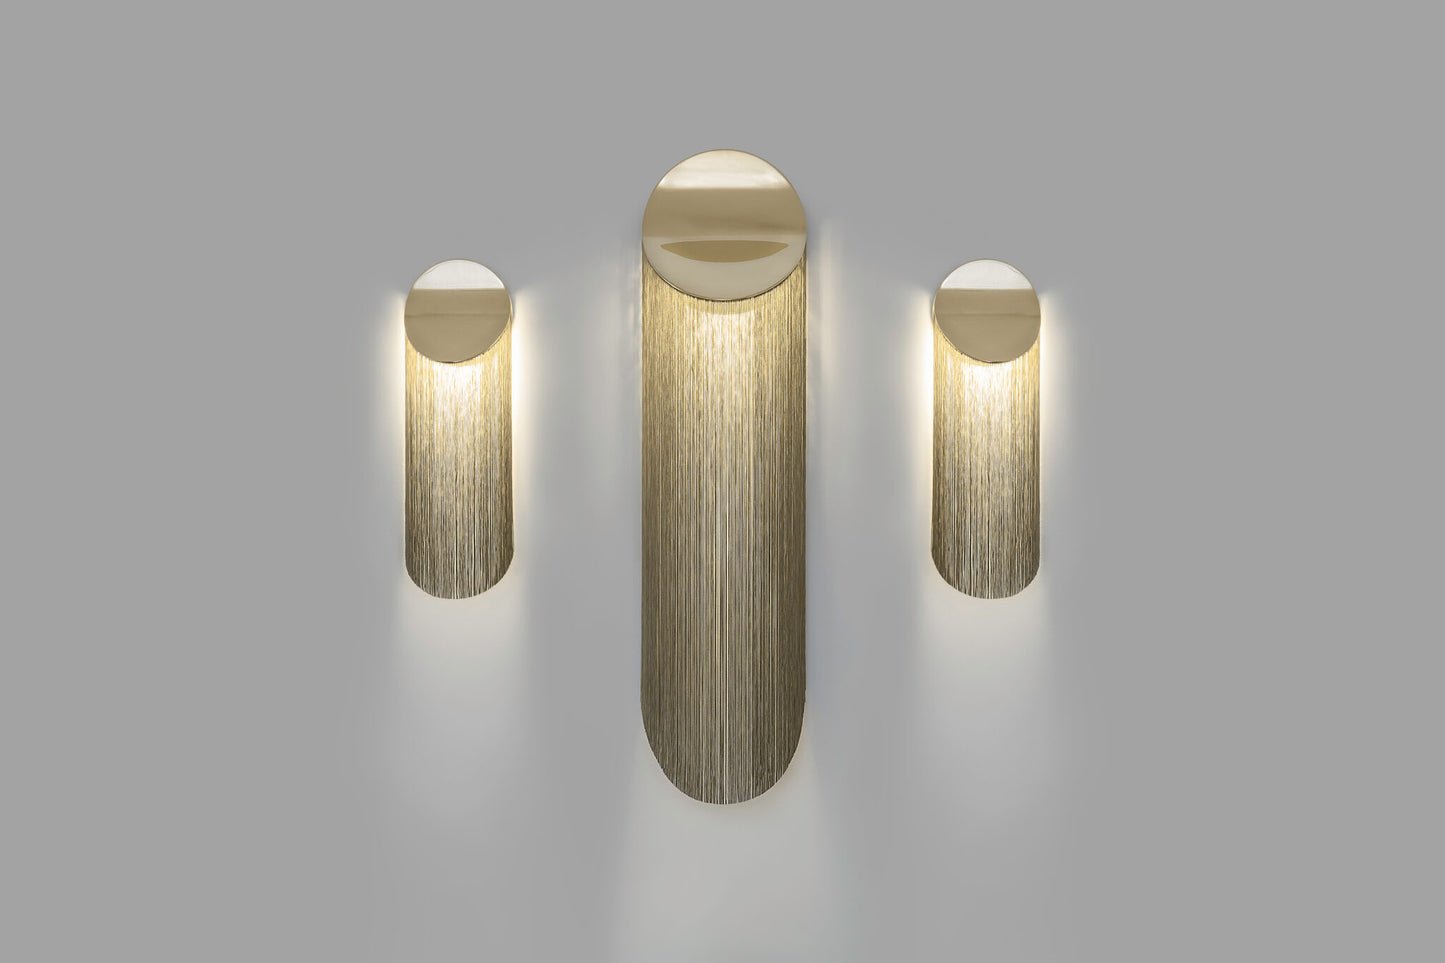 CE PETITE SHORT WALL SCONCES BY D'ARMES - start from $2,000